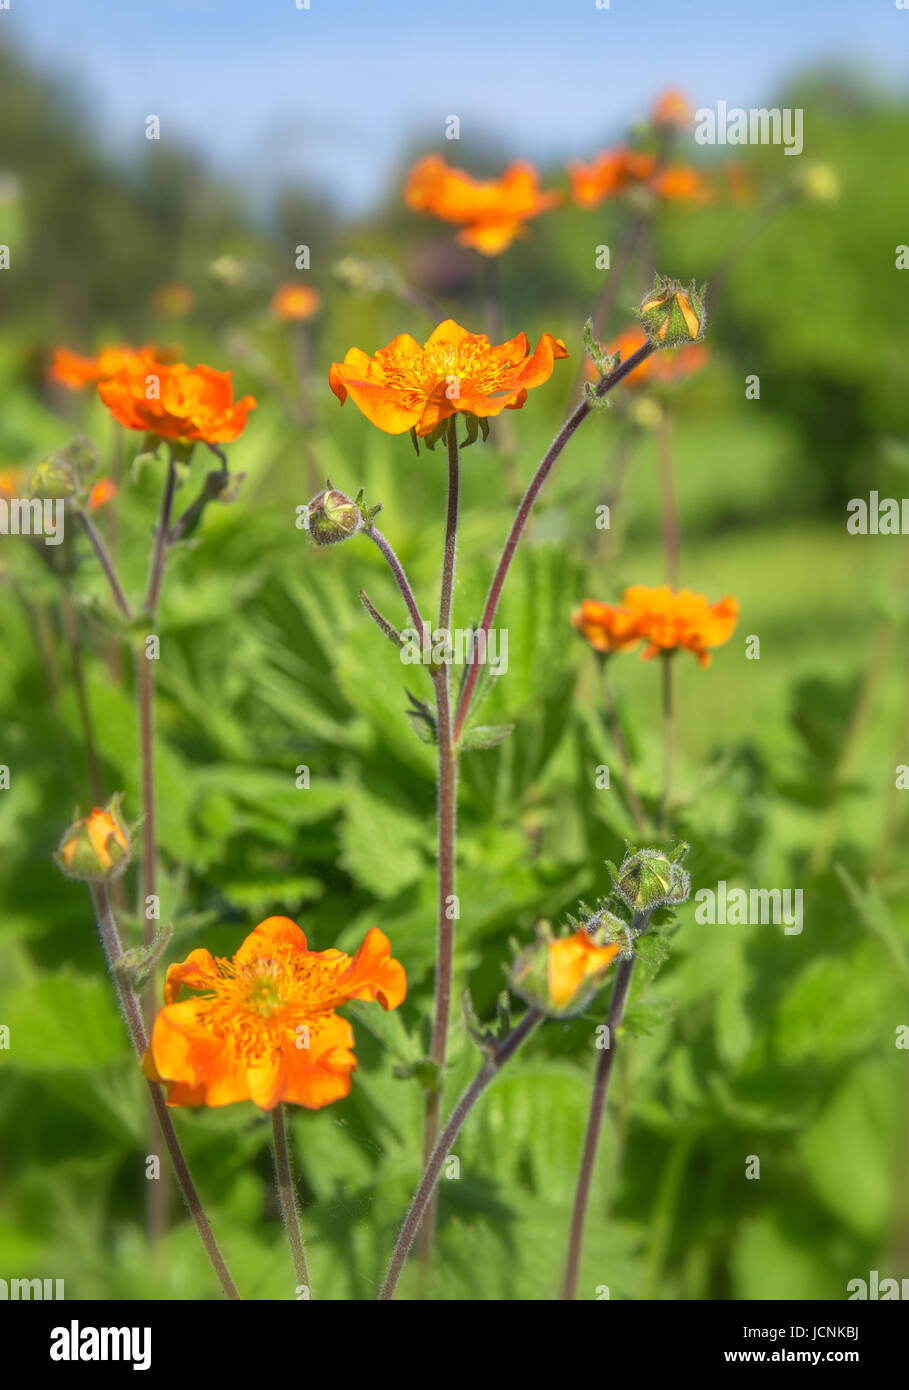 Small bright red orange flowers in the sunlight. Spring summer nature background. Stock Photo